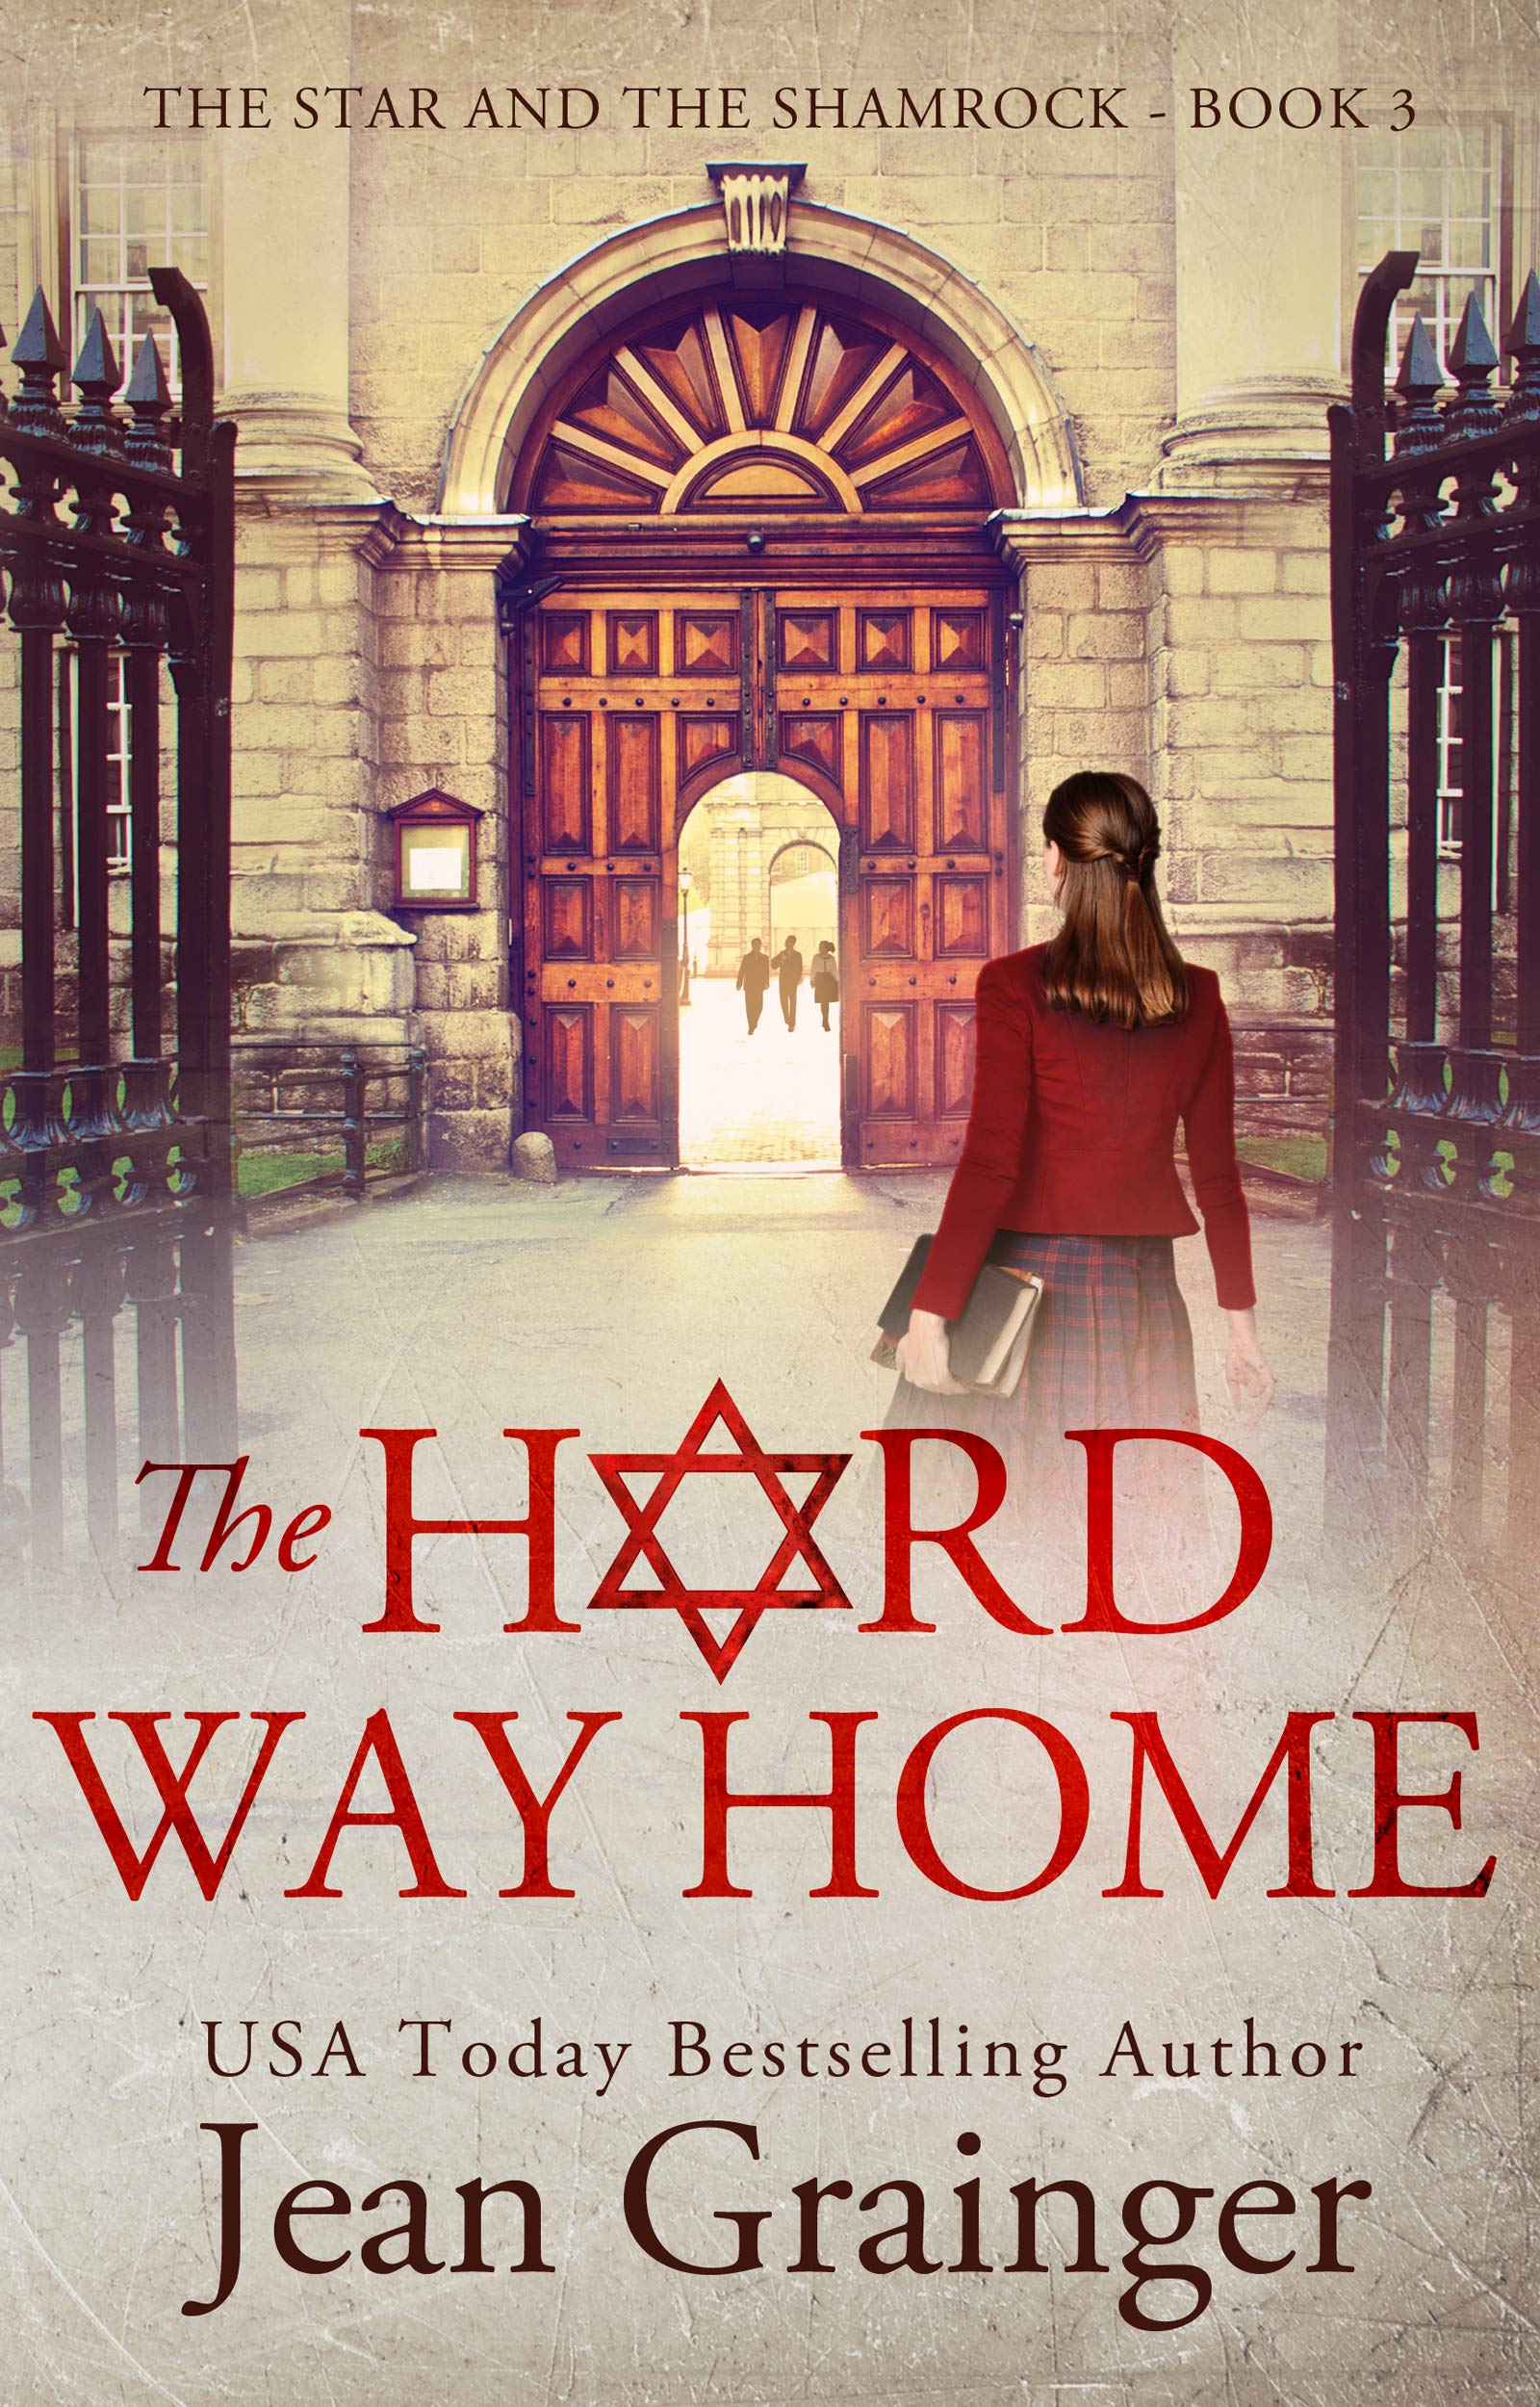 The Hard Way Home (The Star and the Shamrock #3) books